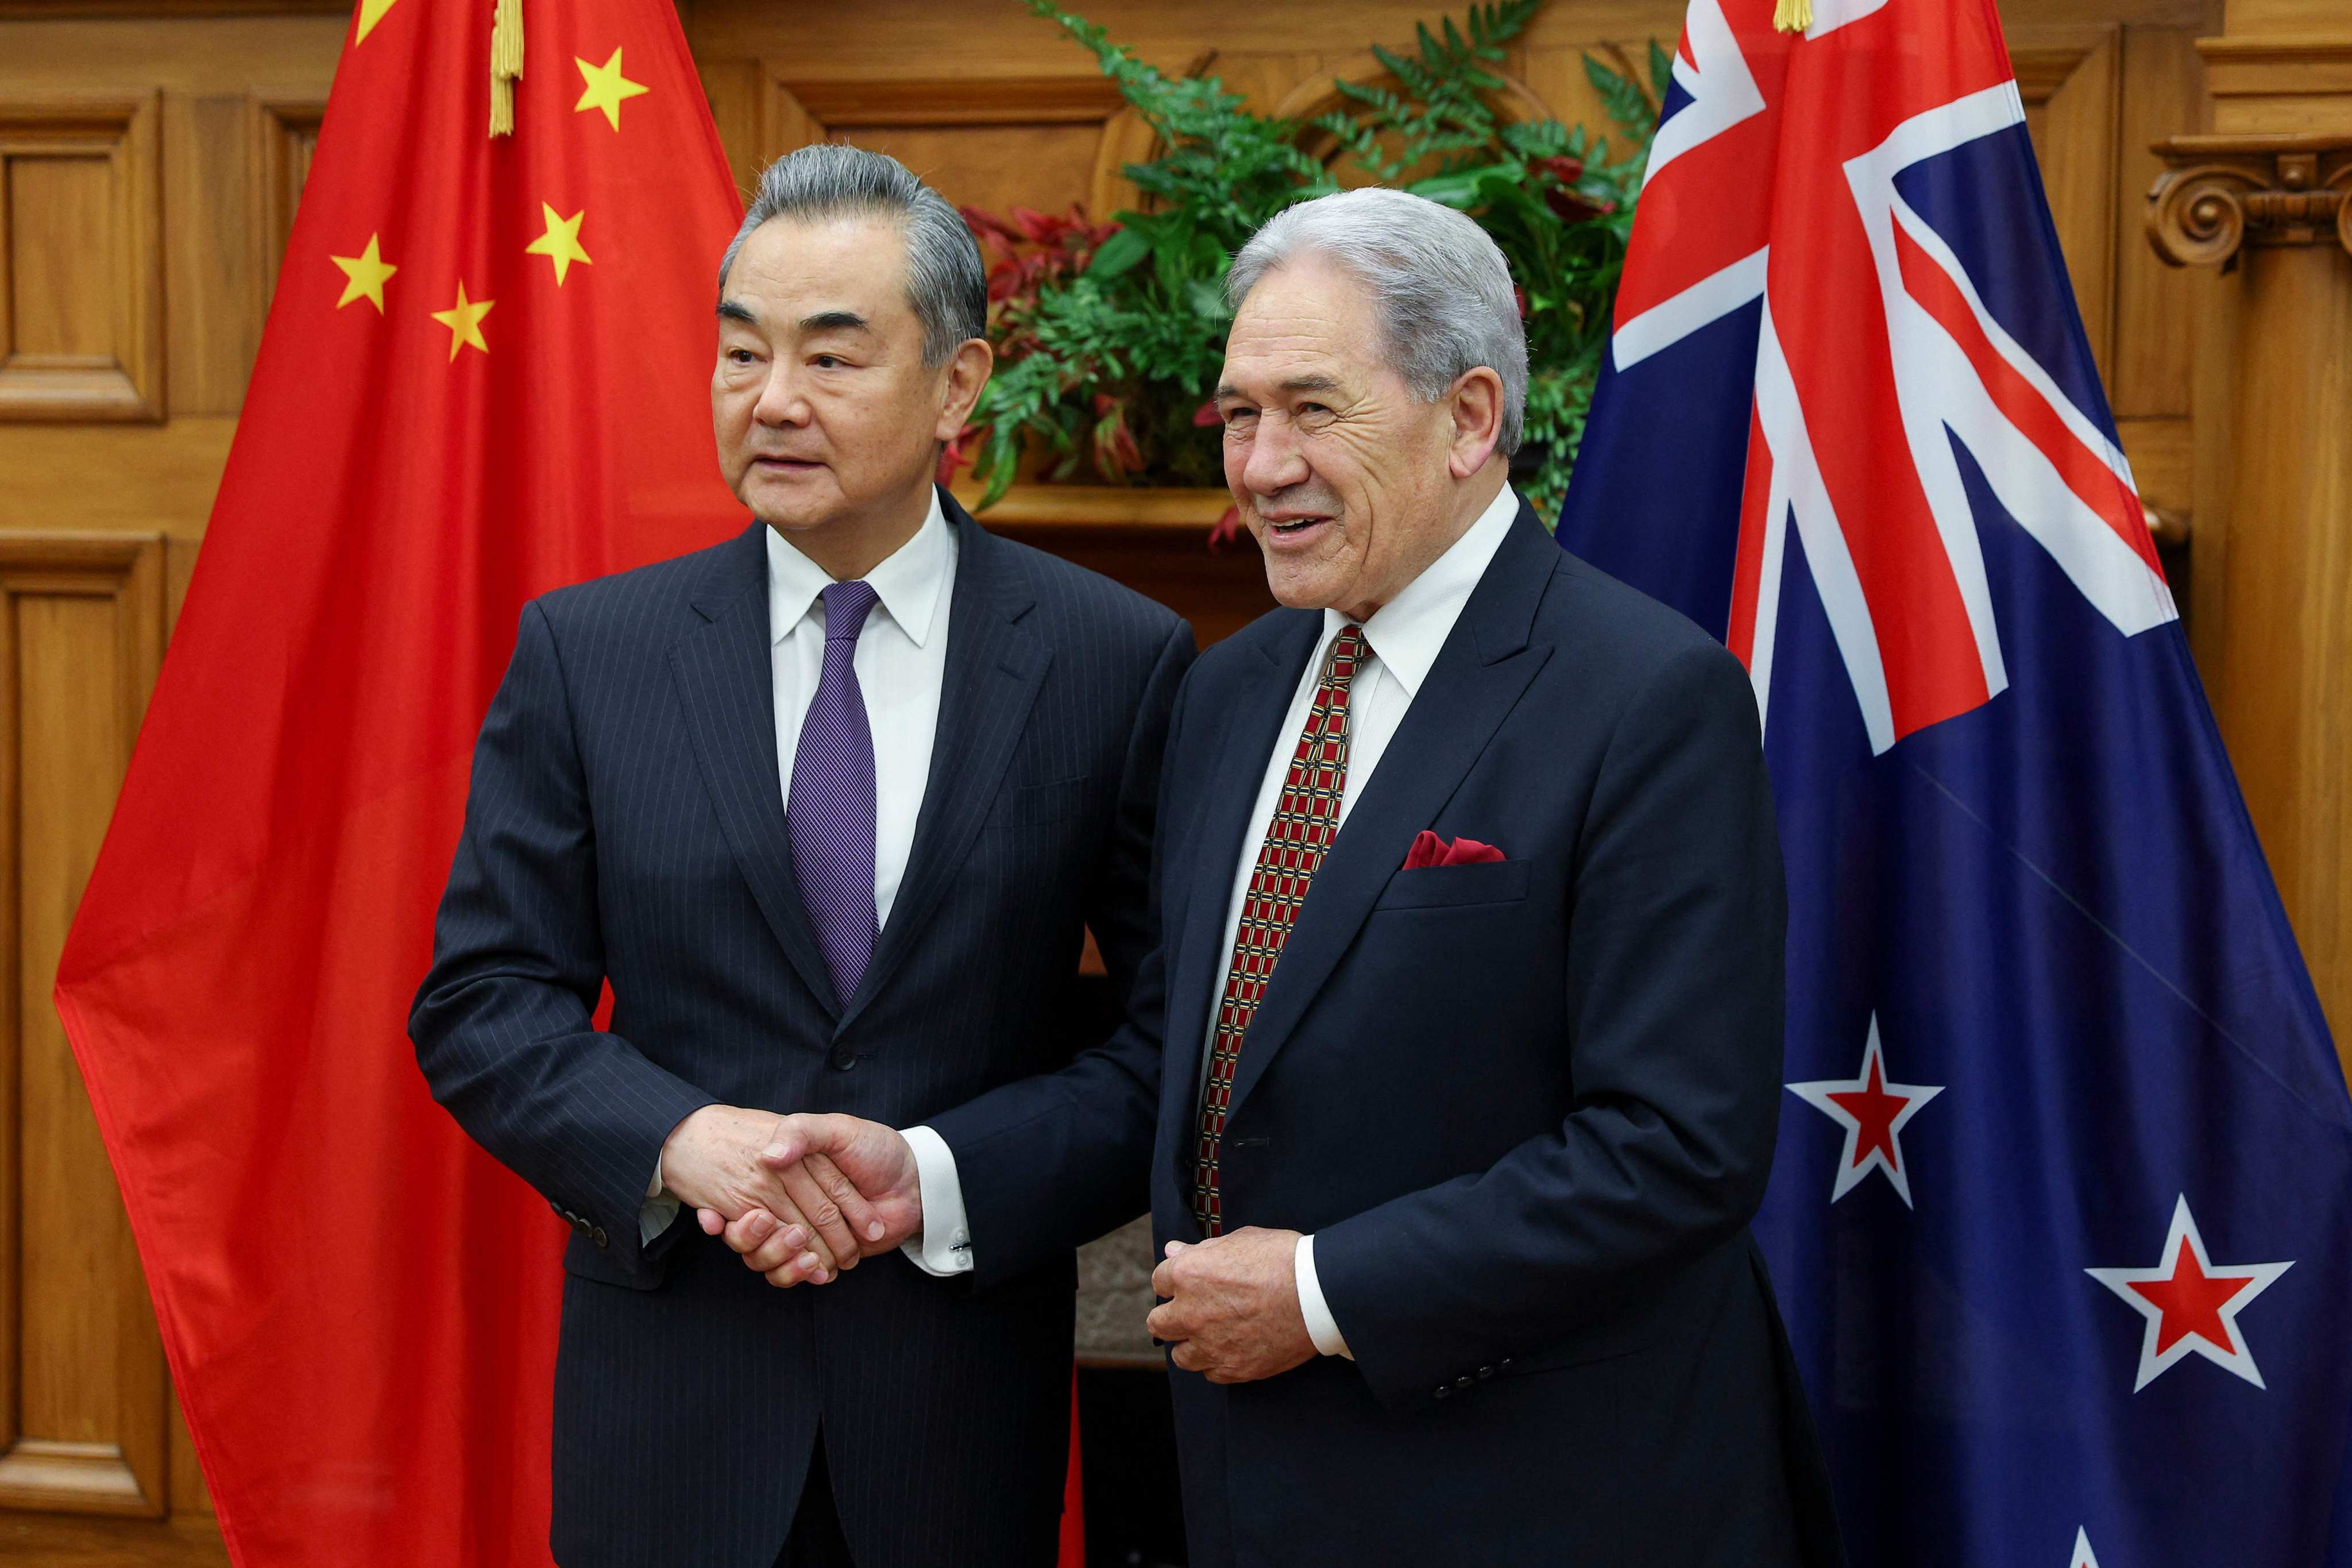 New Zealand’s Minister of Foreign Affairs Winston Peters (right) shakes hands with China’s Foreign Minister Wang Yi during a bilateral meeting at Parliament in Wellington on Monday. Photo: AFP